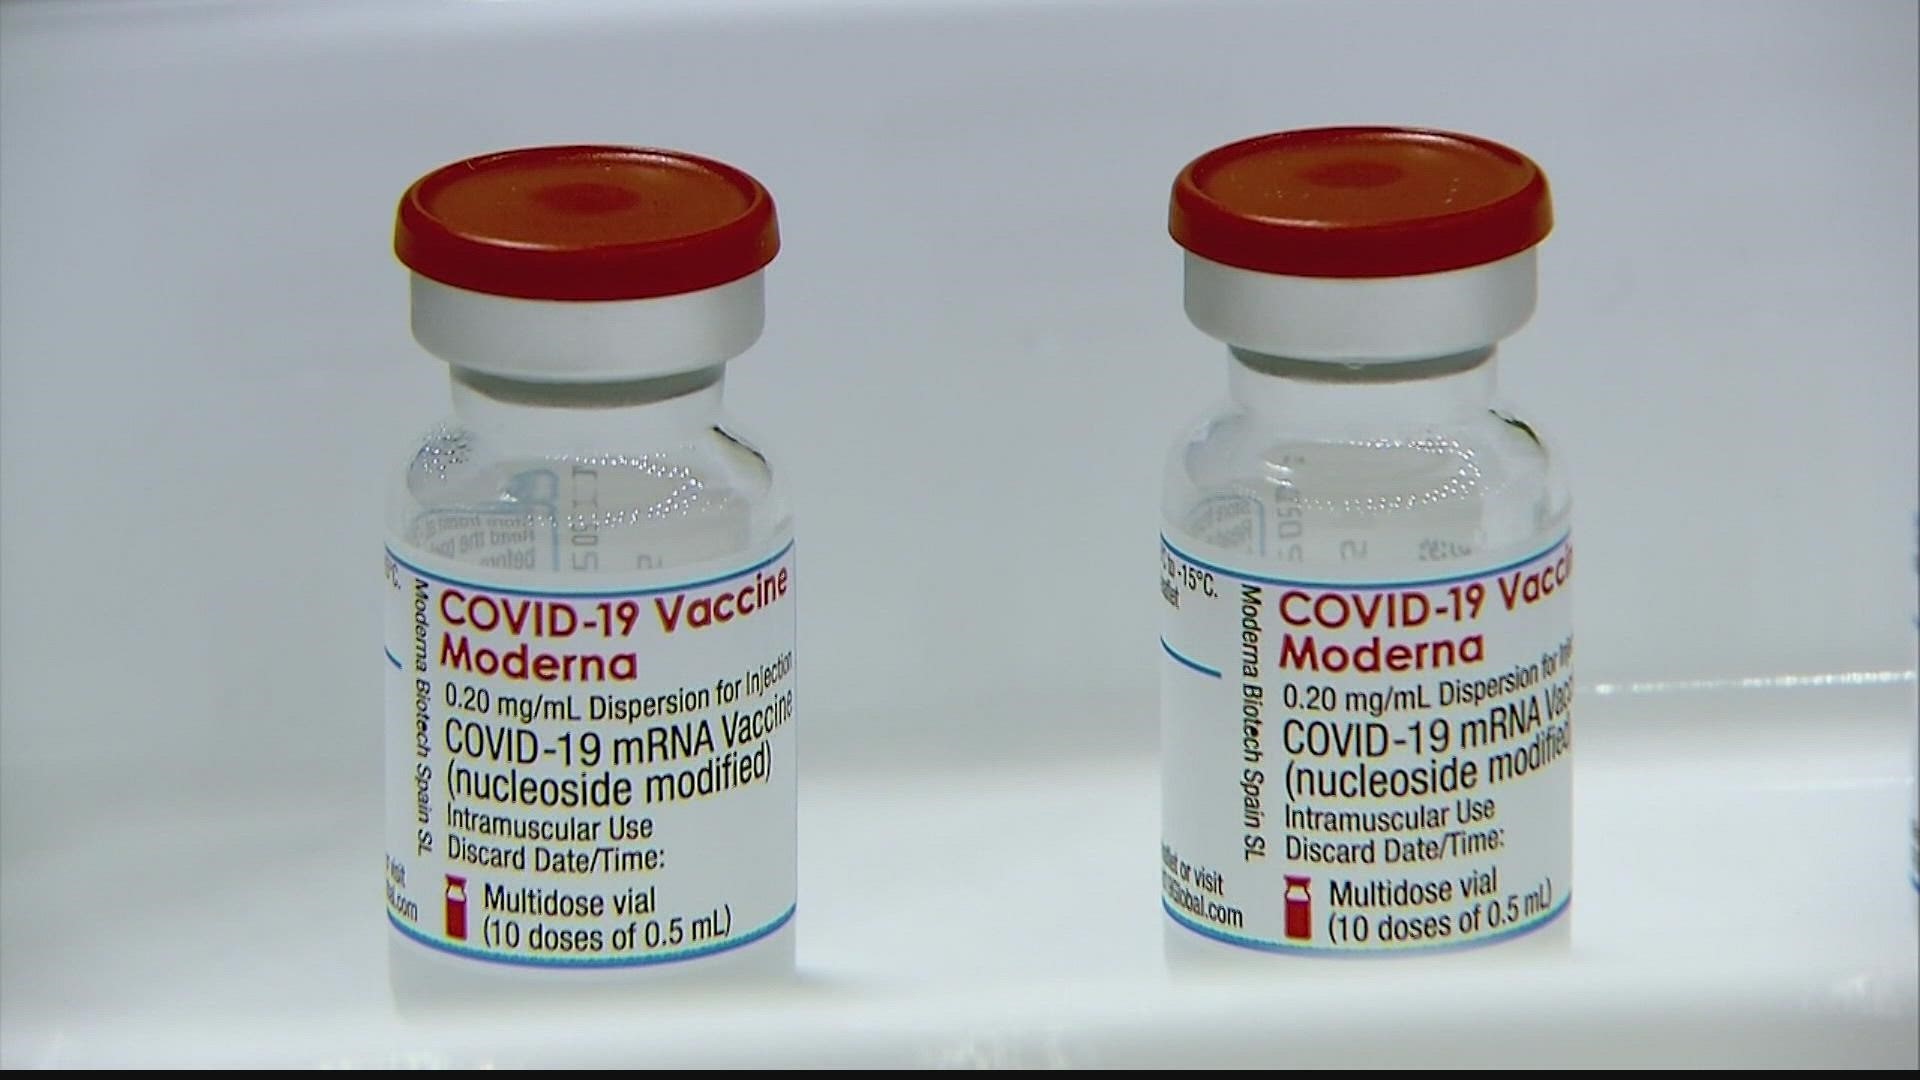 Health authorities are considering whether to order a change in the COVID-19 vaccine recipe for a new round of booster shots in the fall targeting specific variants.